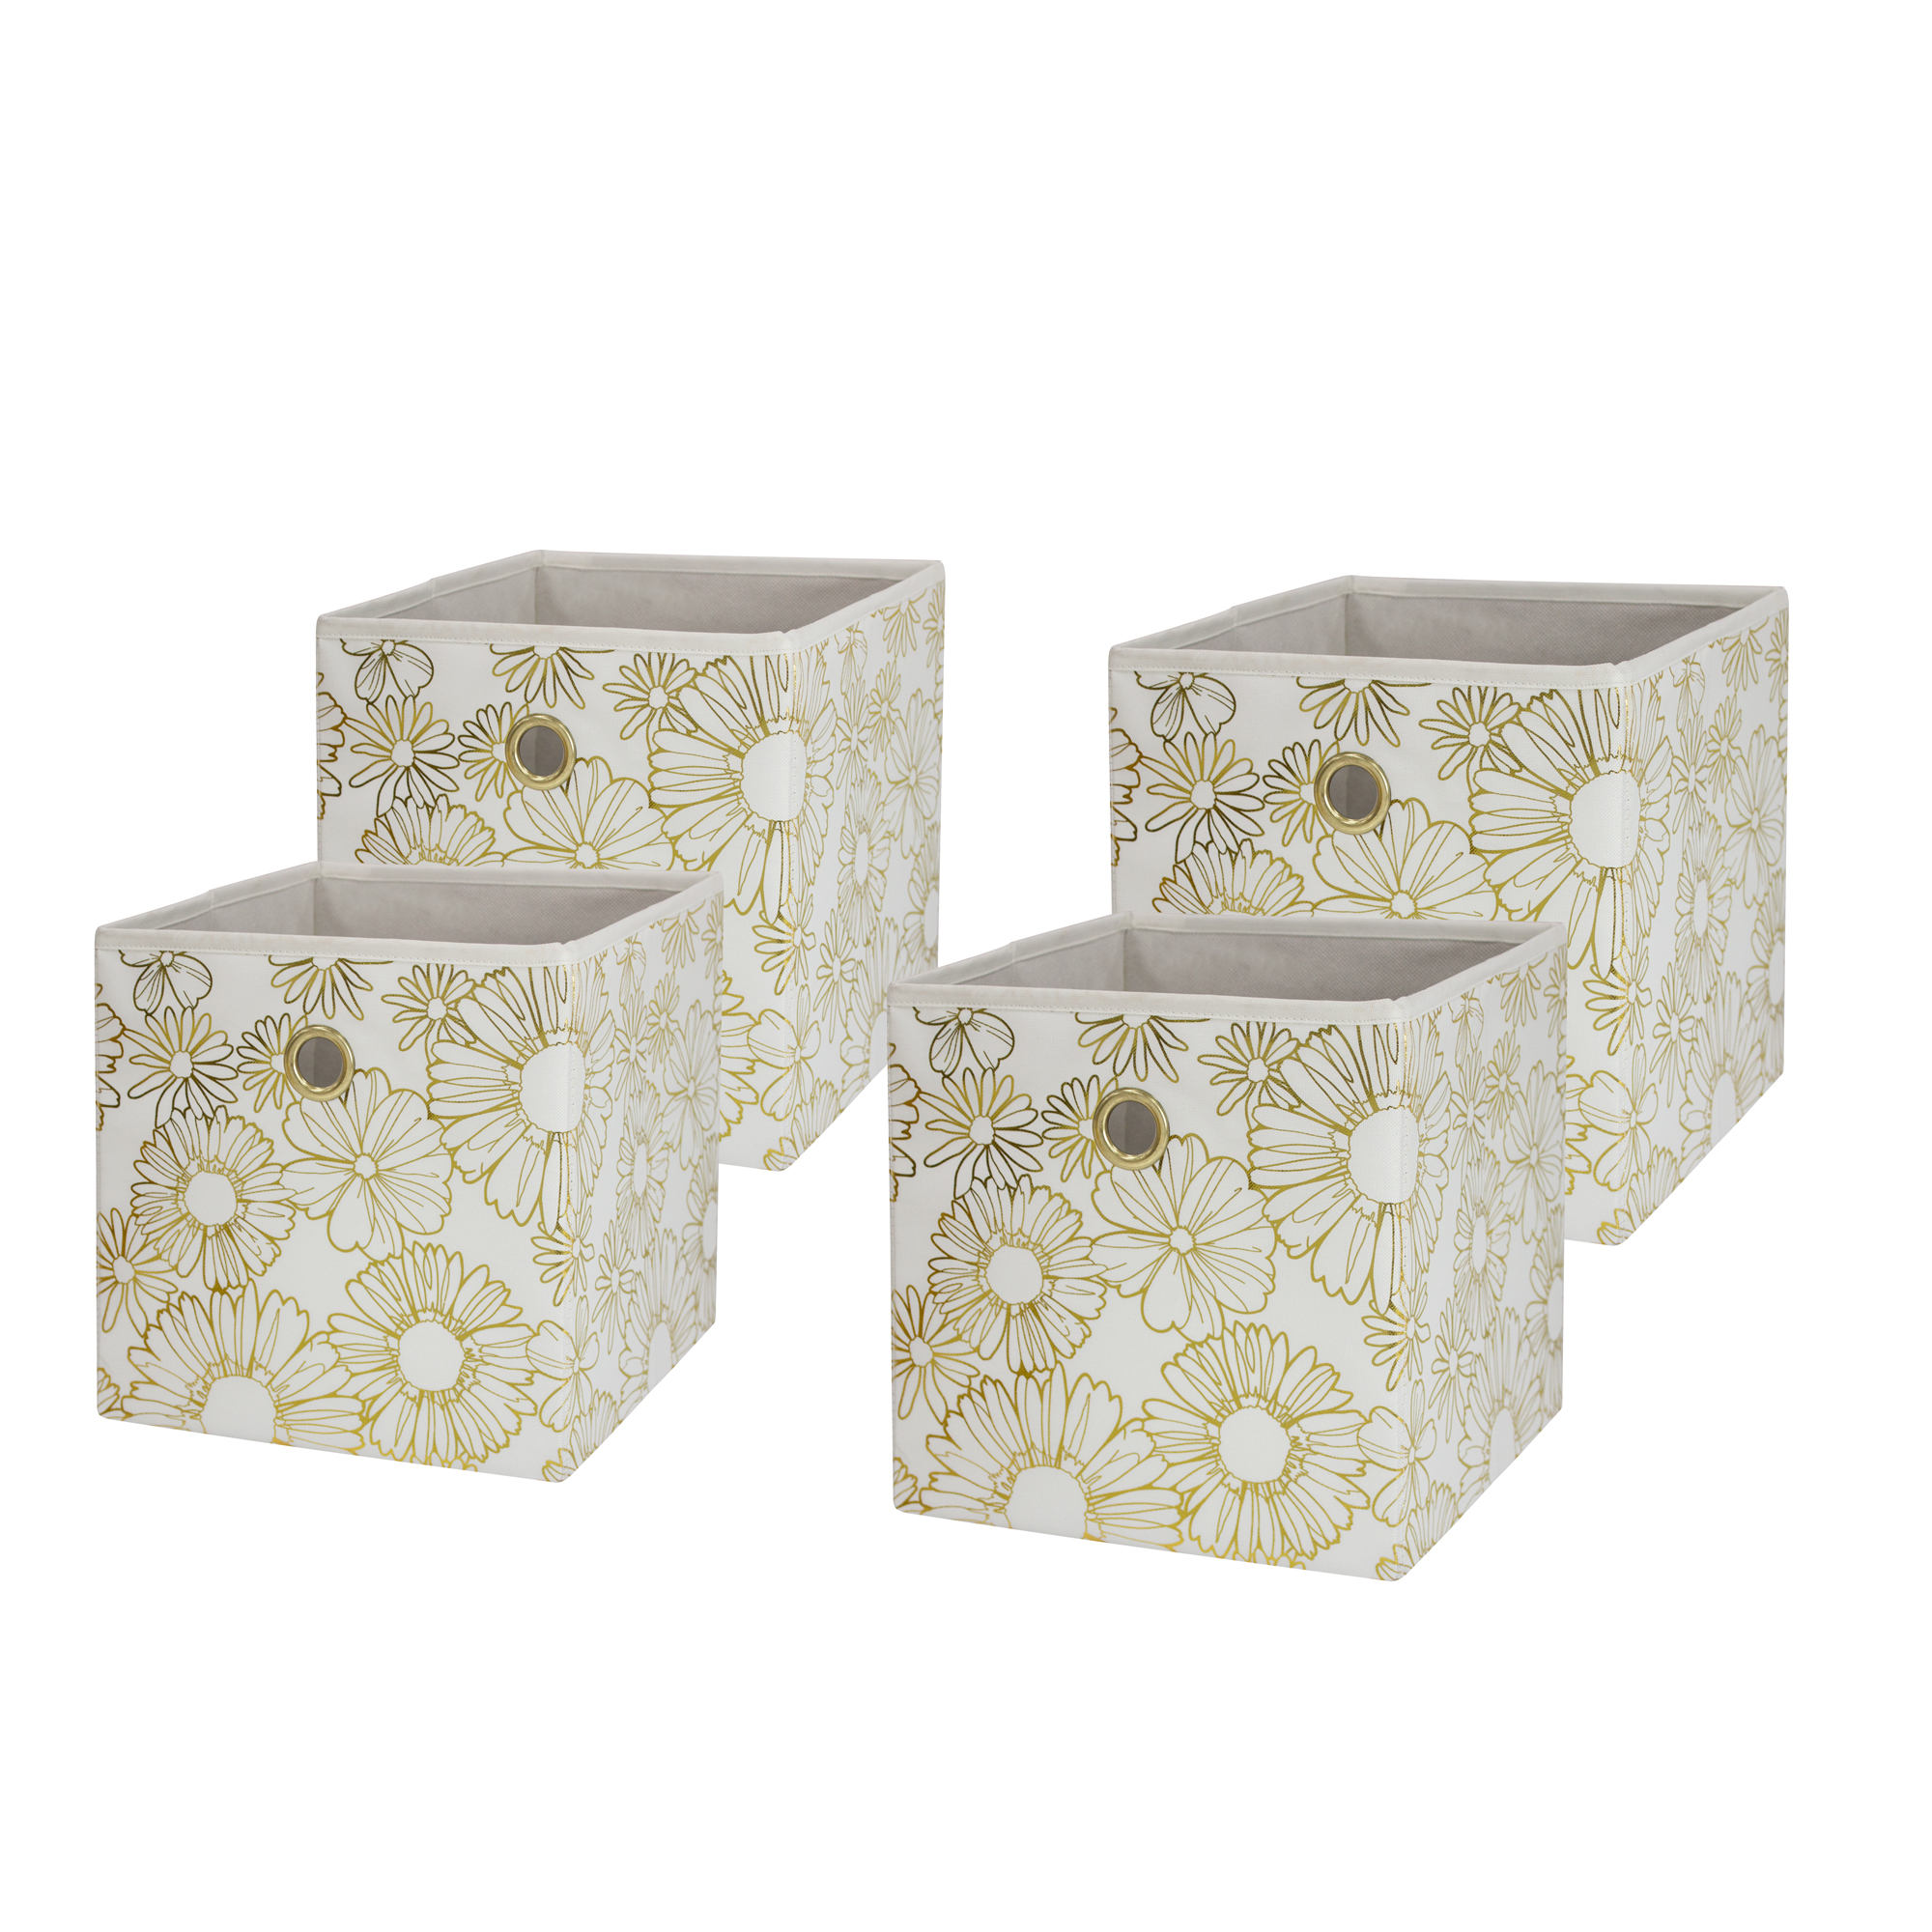 Mainstays Collapsible Fabric Cube Storage Bins (10.5" x 10.5"), 4 Pack, Gold Metallic - image 1 of 6